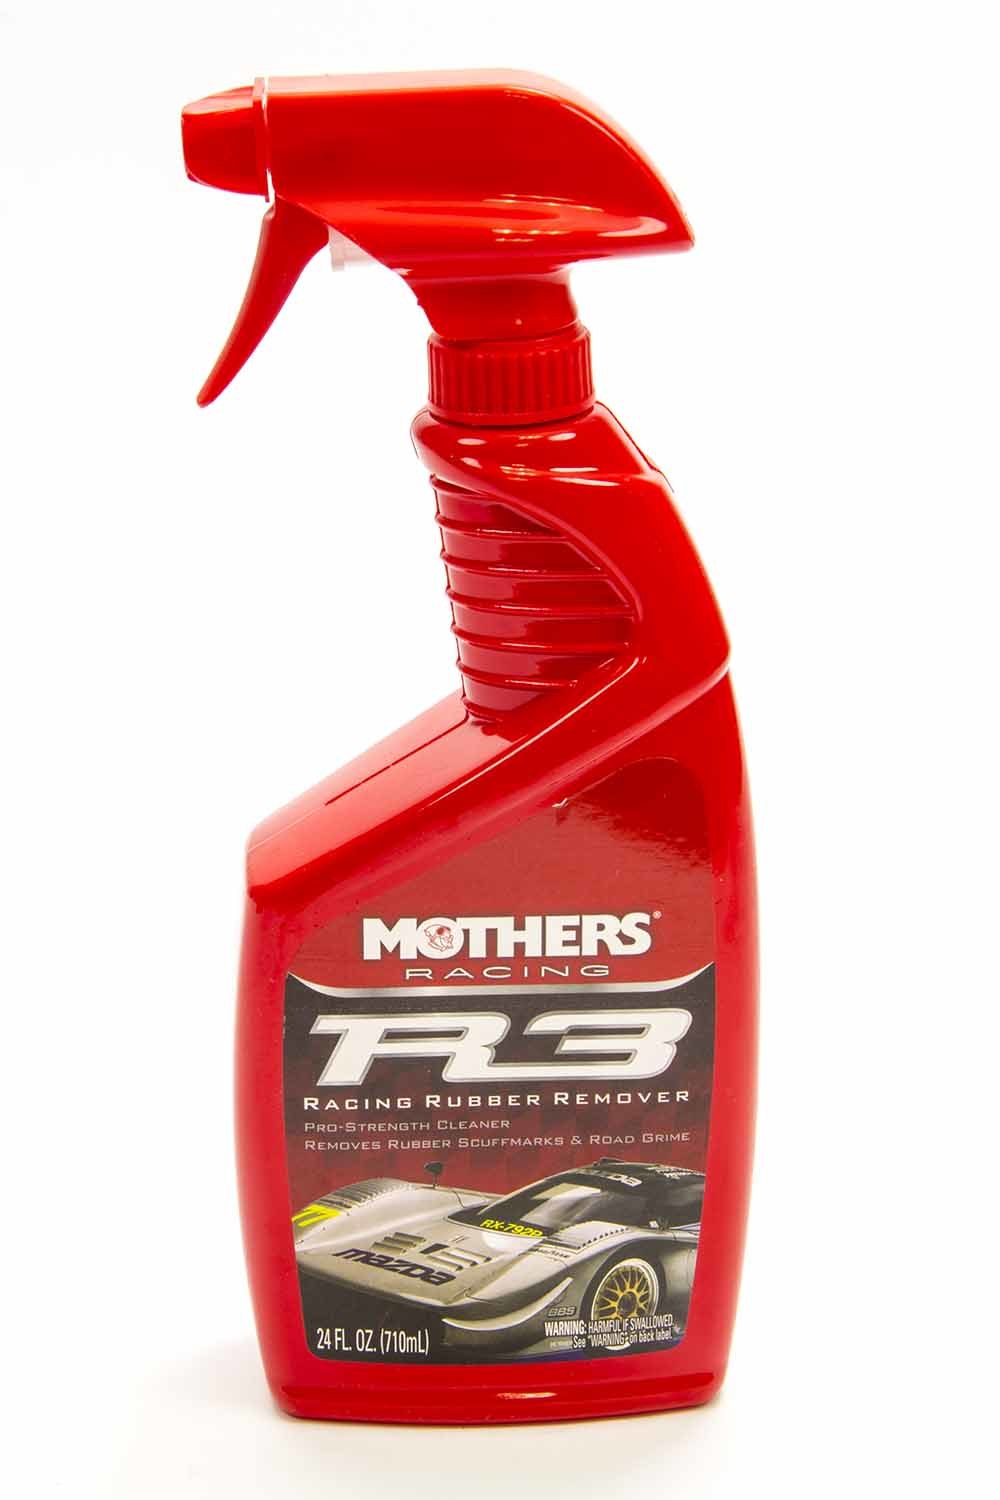 MOTHERS Rubber Remover, R3, 24 oz Spray Bottle, Each